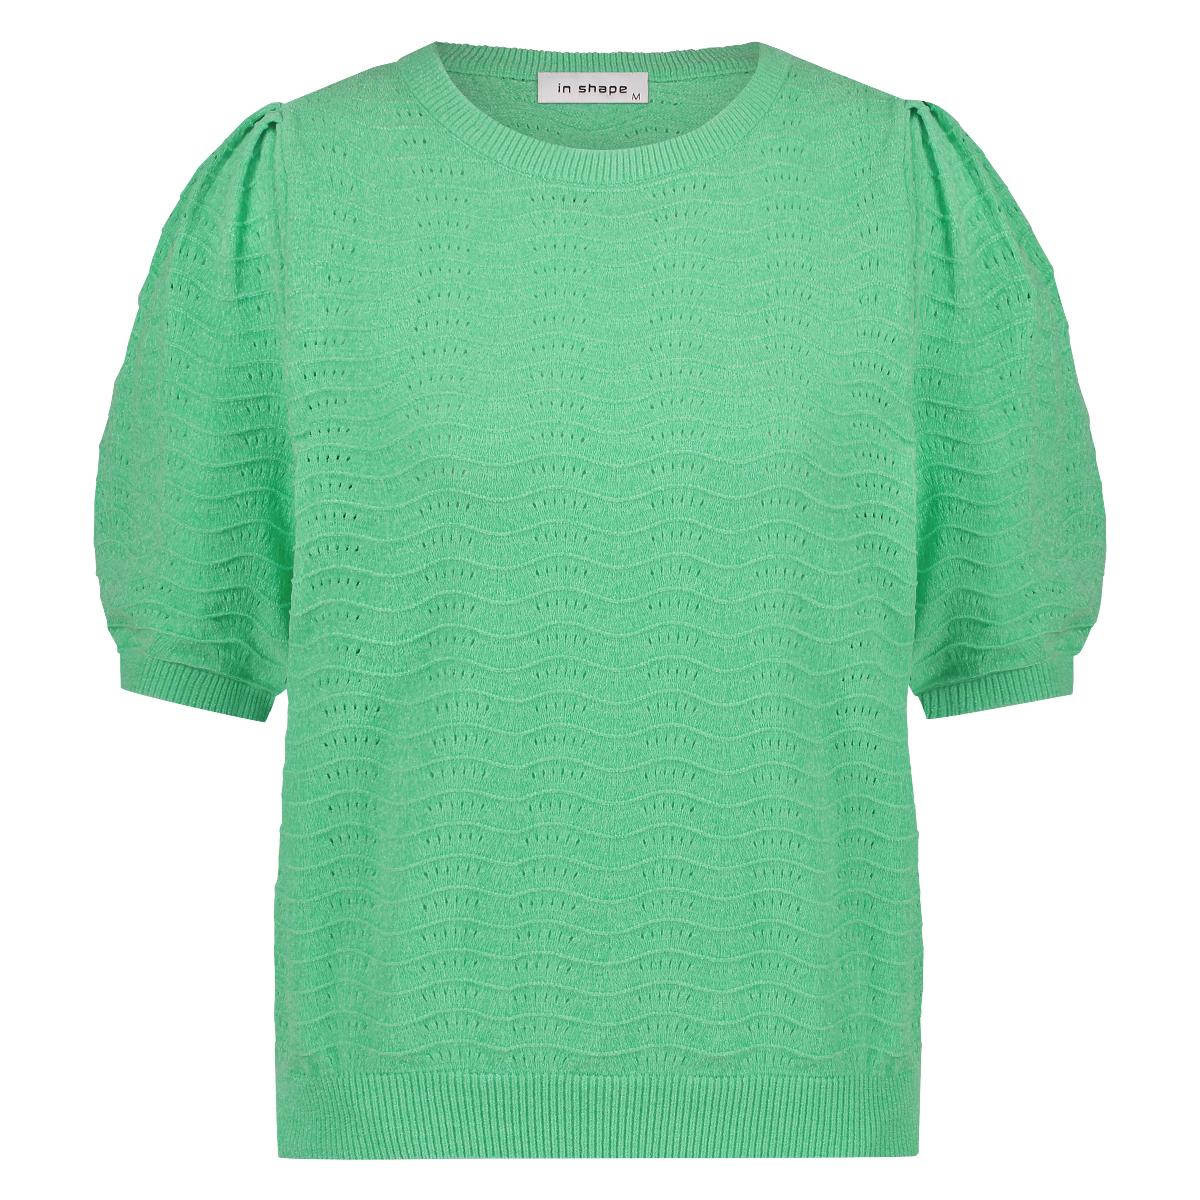 Pullover Izzy s/s green